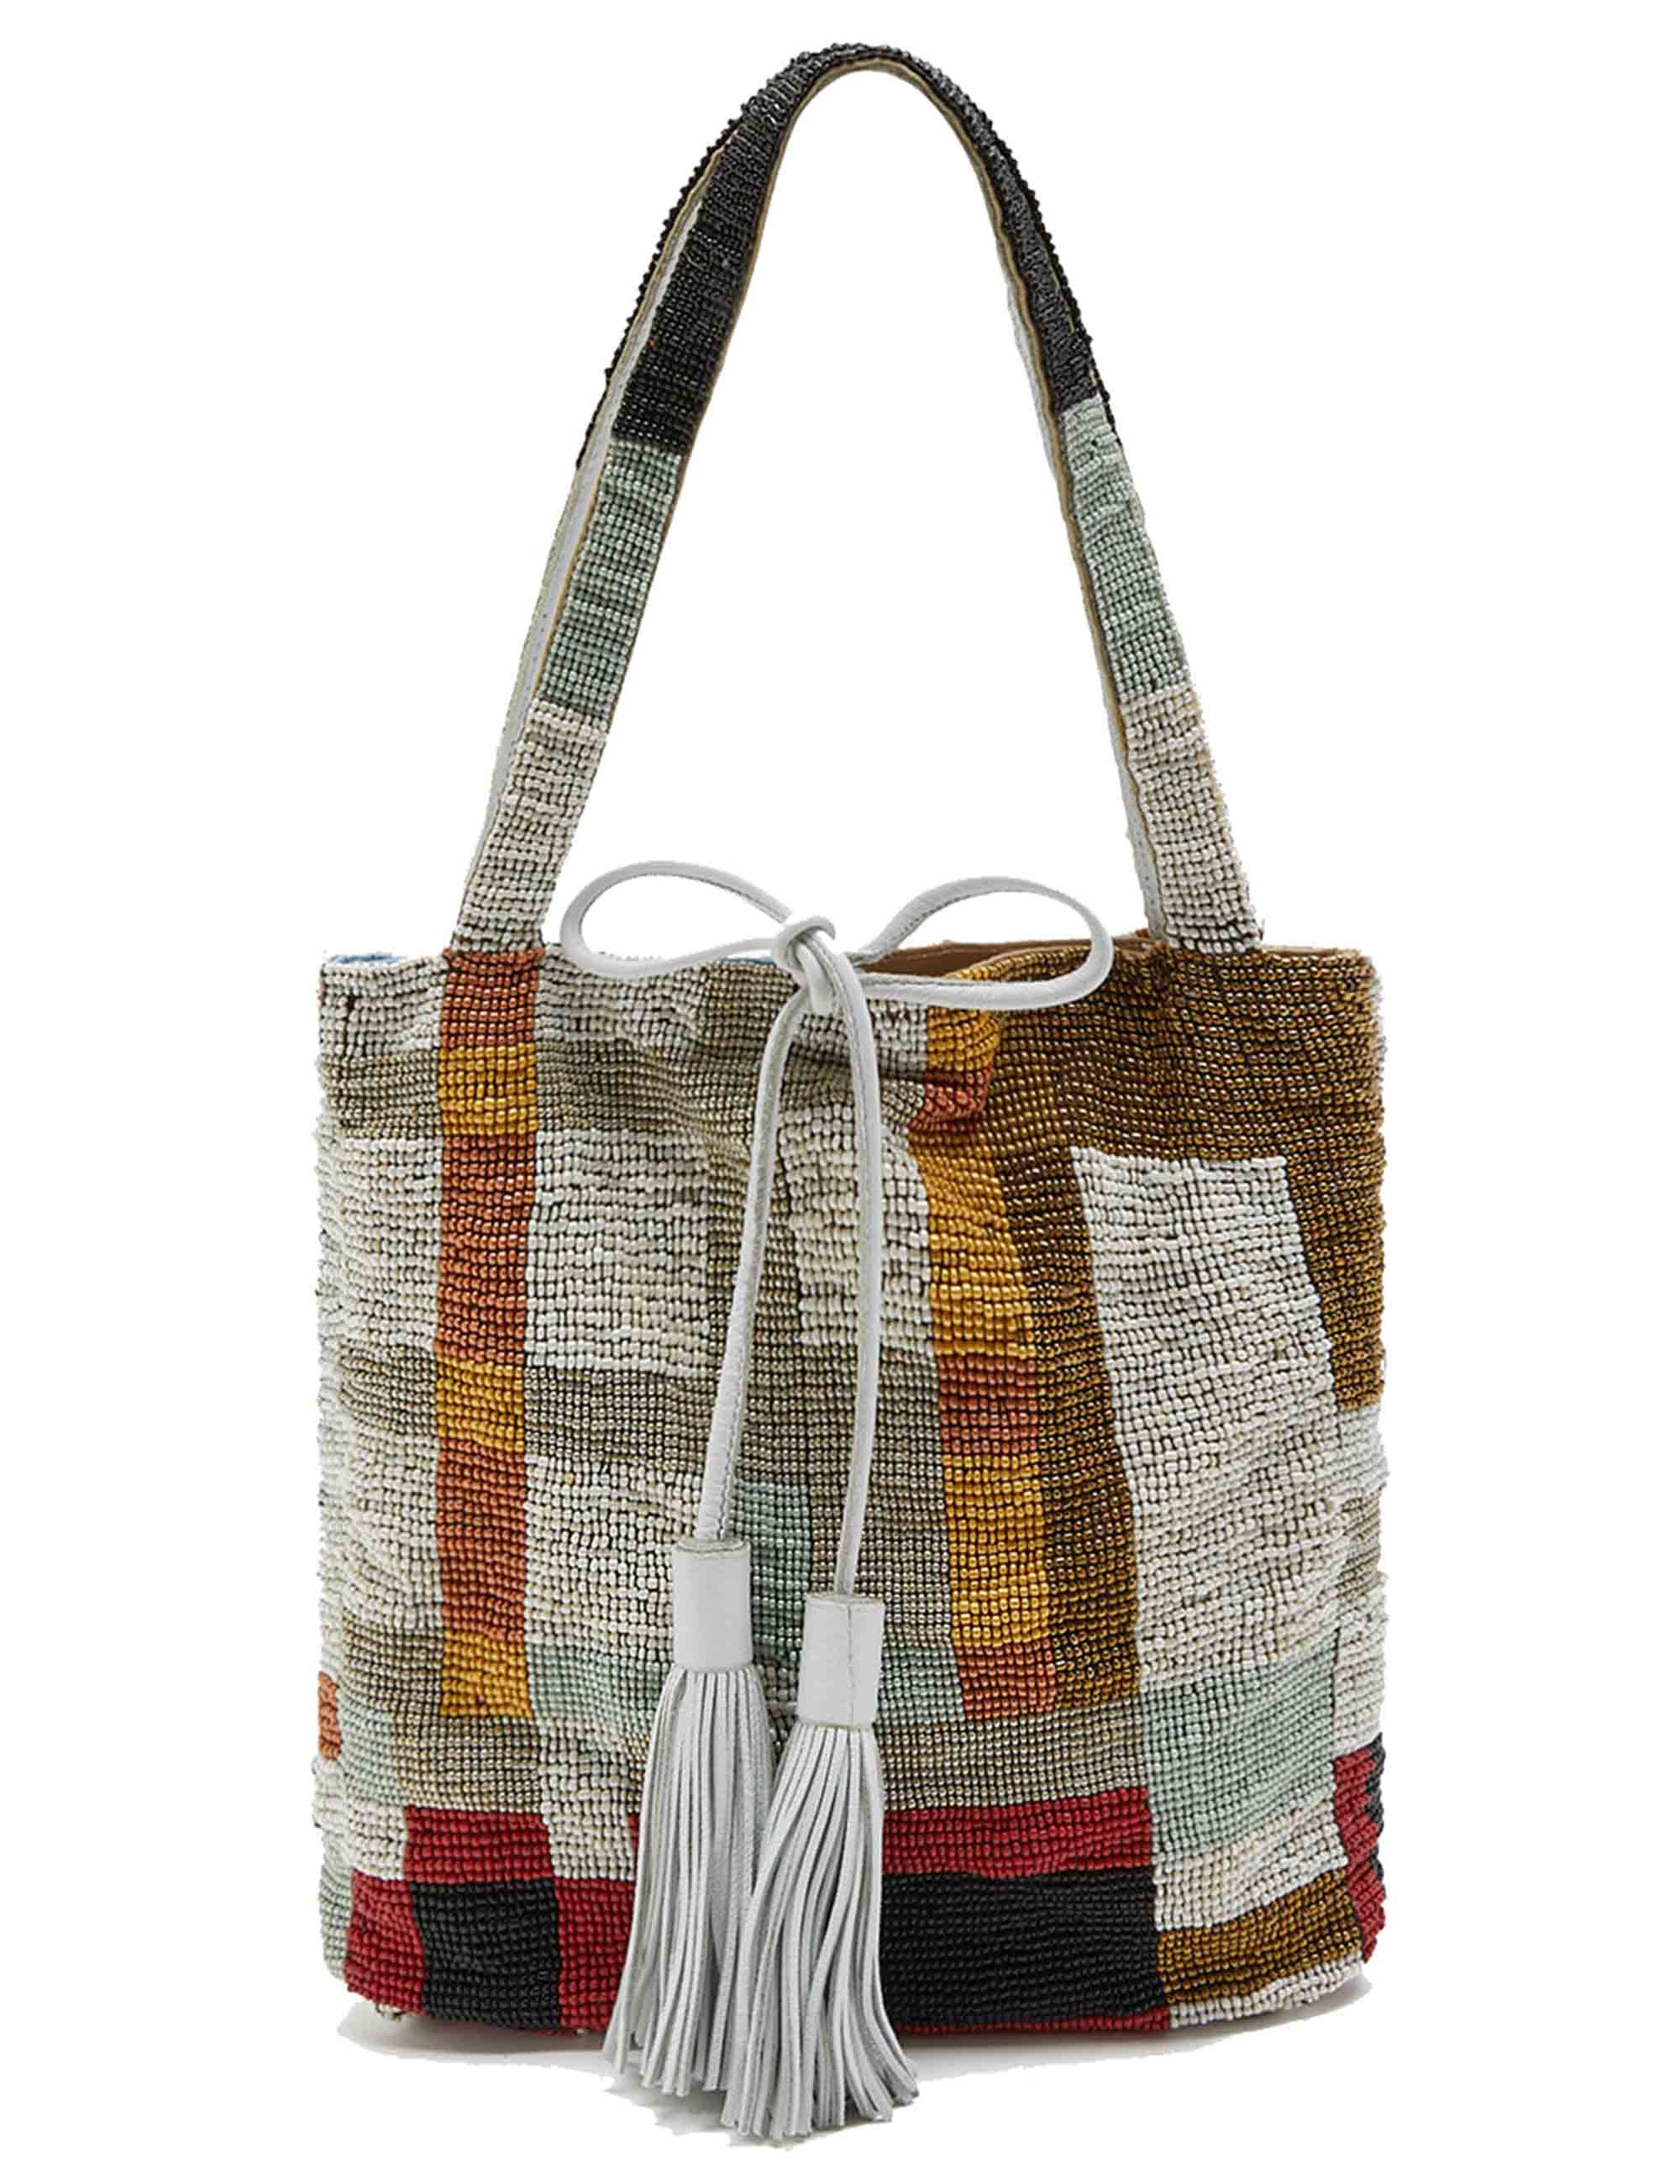 Multicheck women's shoulder bags in gray beads and leather tassels